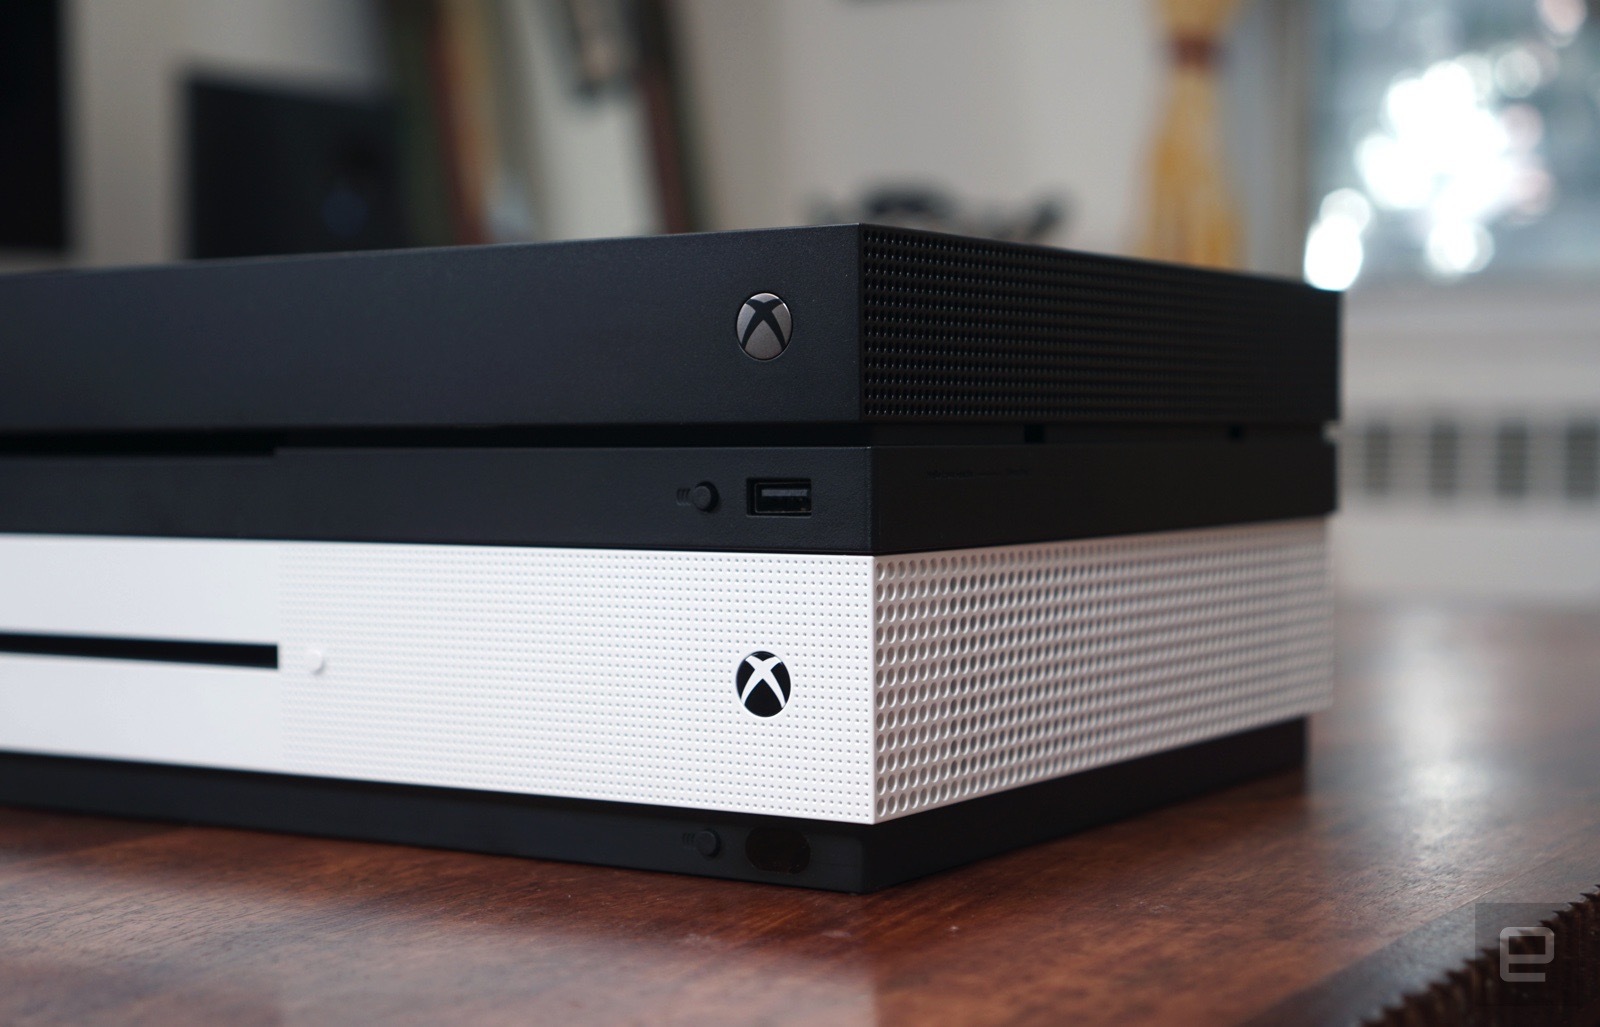 Xbox One update can automatically put your TV in game mode